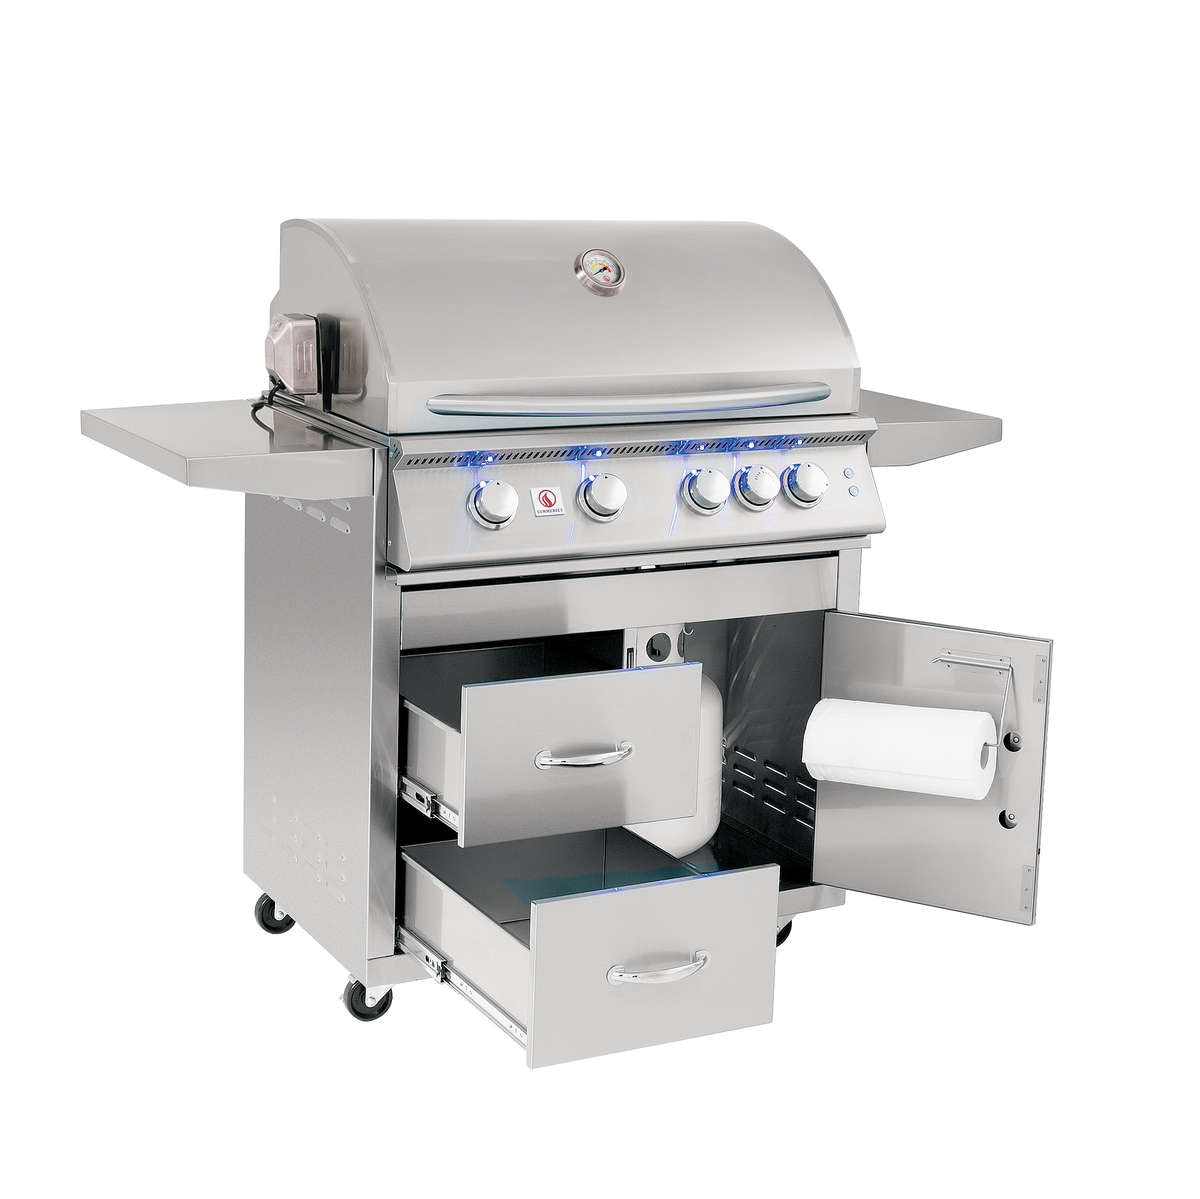 Summerset Sizzler Pro 32 Inch Propane Gas Grill on Cart